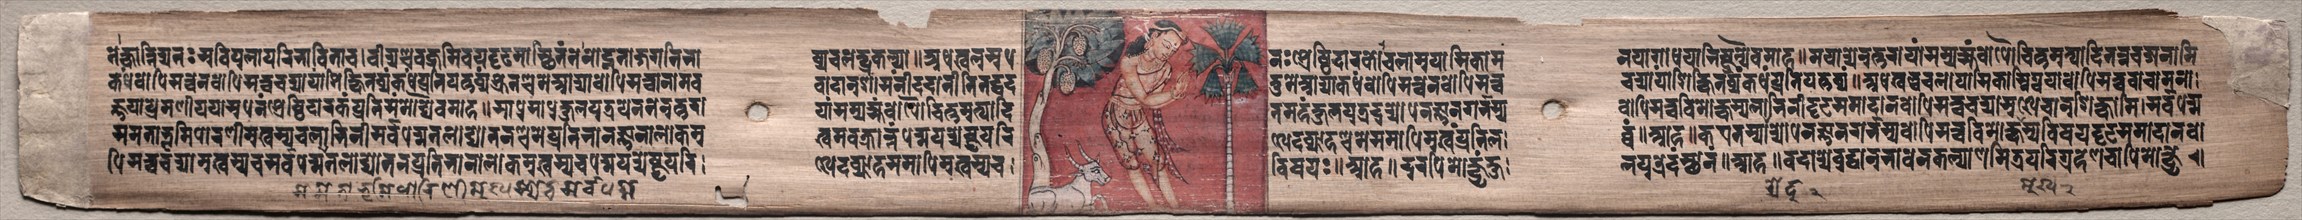 Leaf from Gandavyuha: Sudhana in a Landscape, from Chapter 22 Achala (recto), 1000-1100s. Eastern